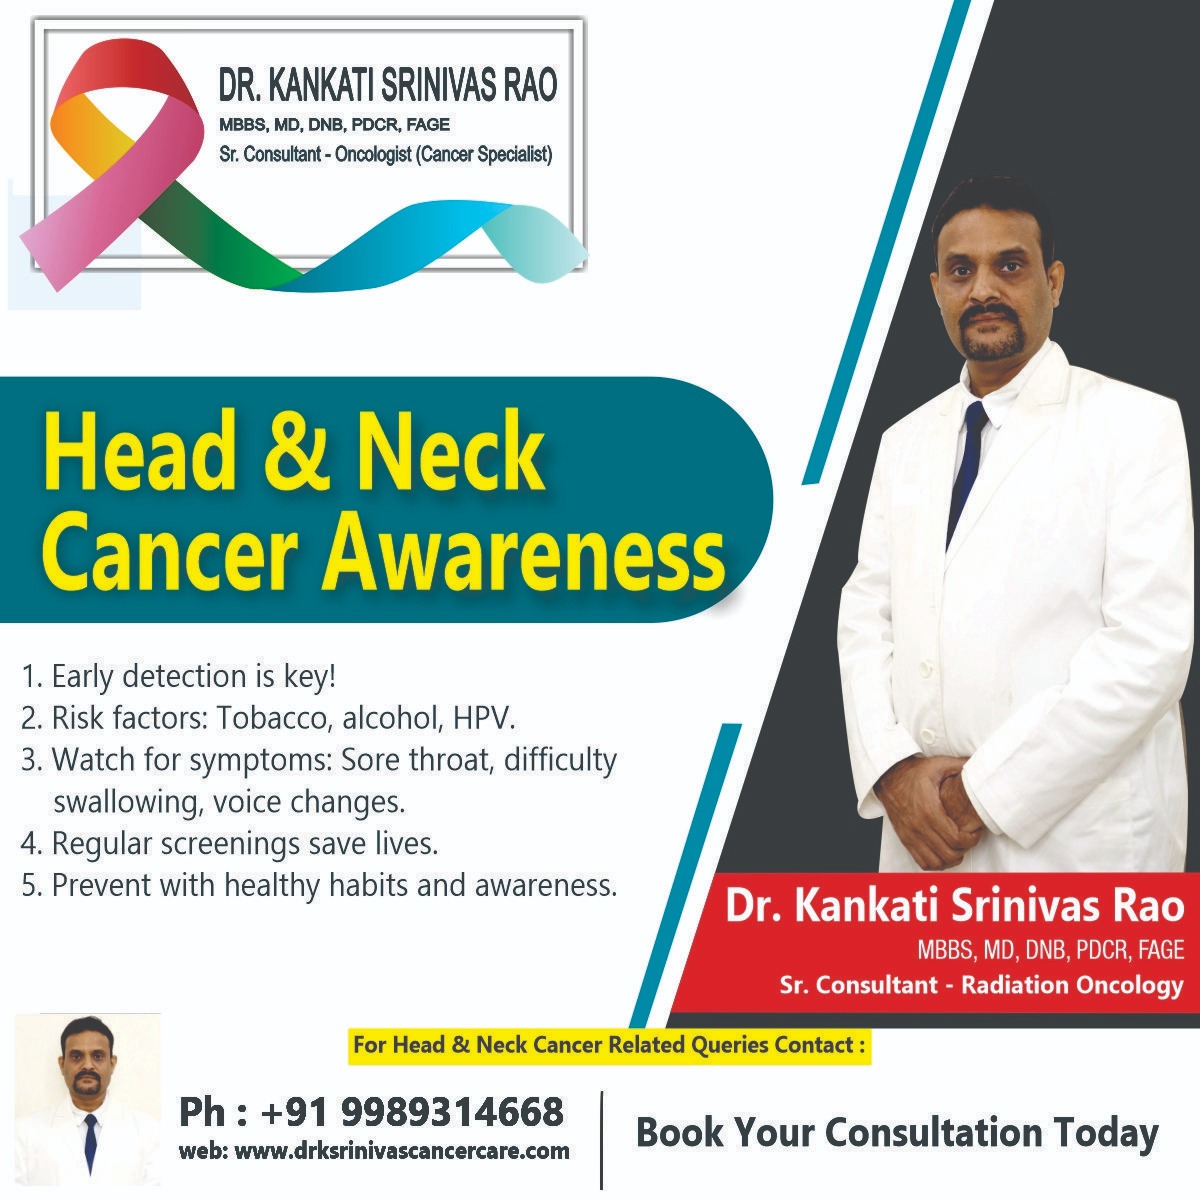 Head and neck cancer awareness ✔️ Early detection is key ✔️ Risk factors: Tobacco, alcohol, HPV ✔️ Watch for symptoms: Sore throat, difficulty swallowing, voice changes ✔️ Regular screenings save lives ✔️ Prevent with healthy habits and awareness. #headandneckcancer